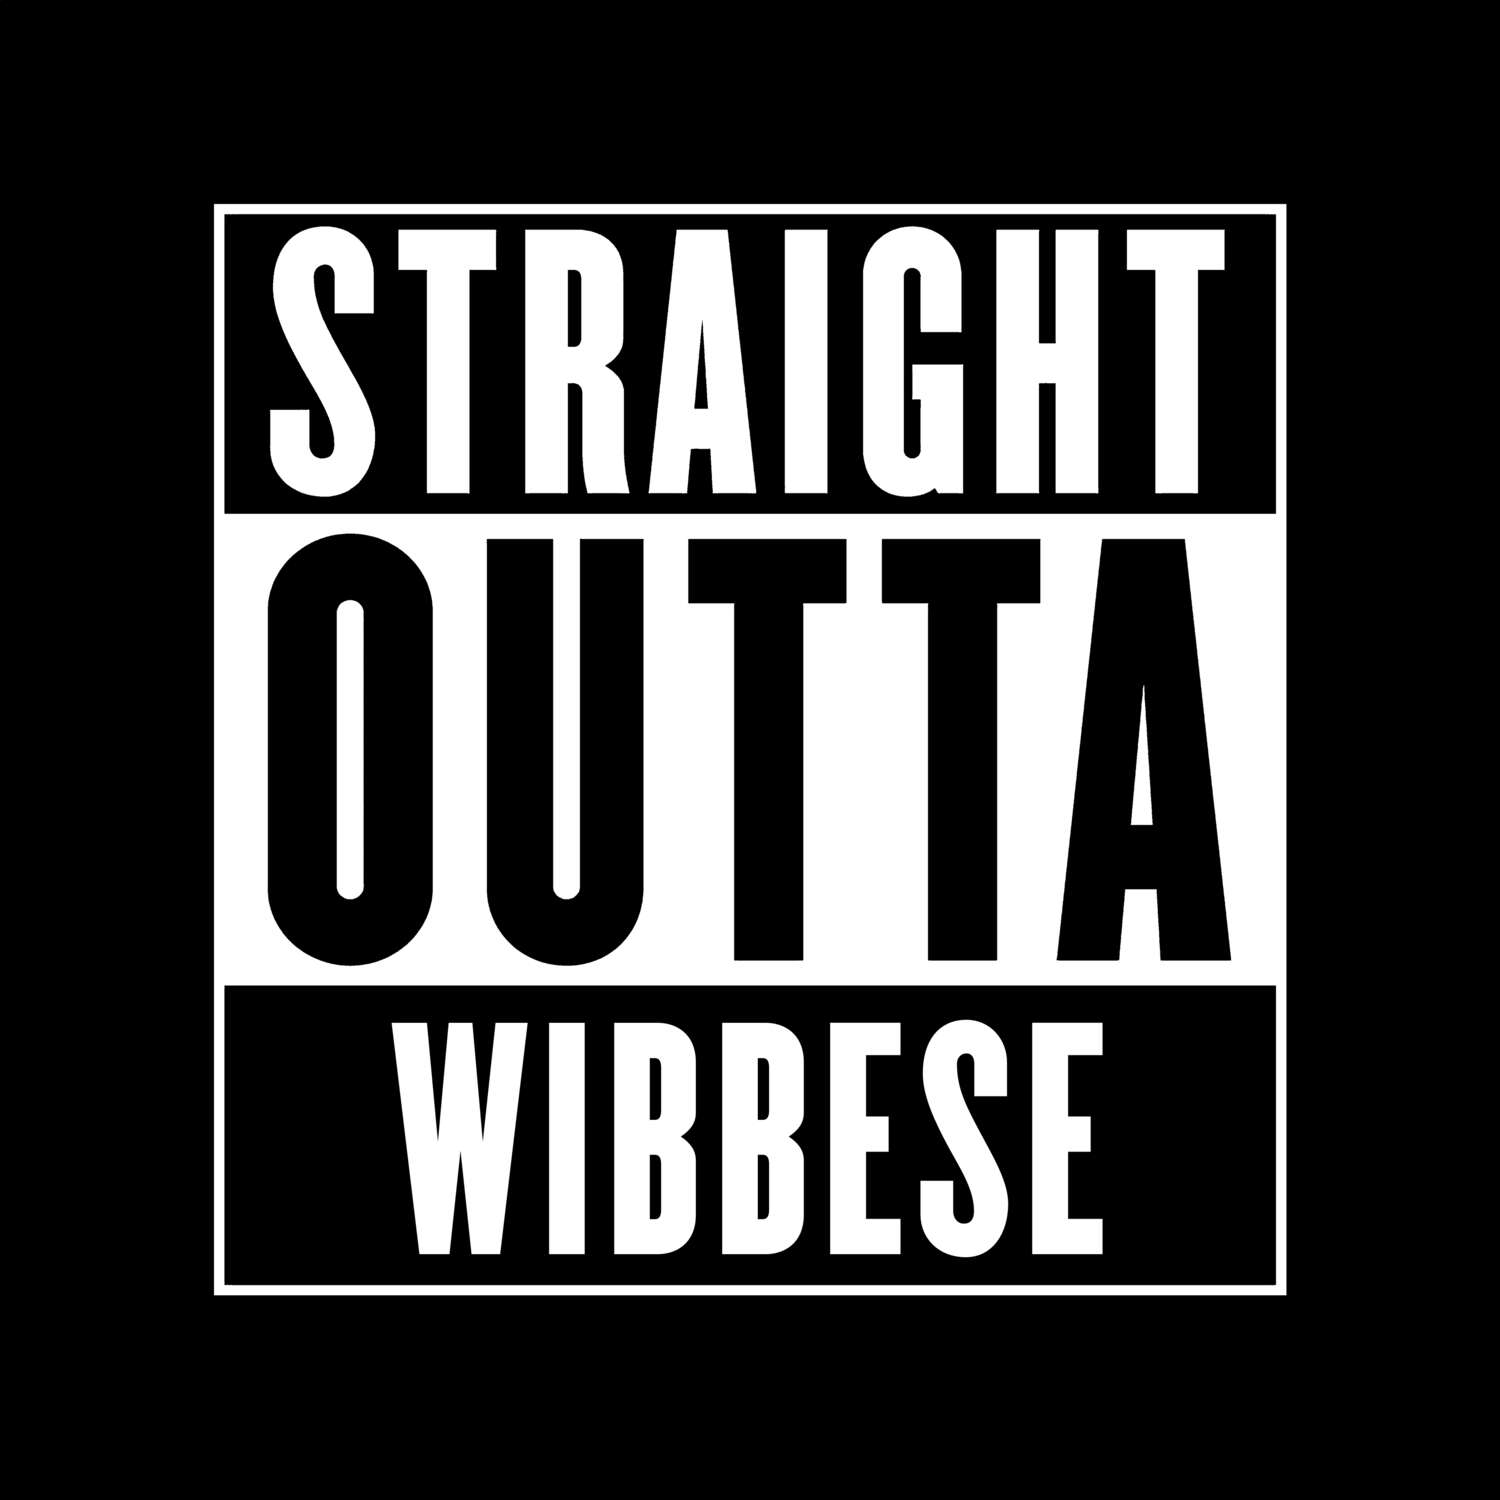 Wibbese T-Shirt »Straight Outta«